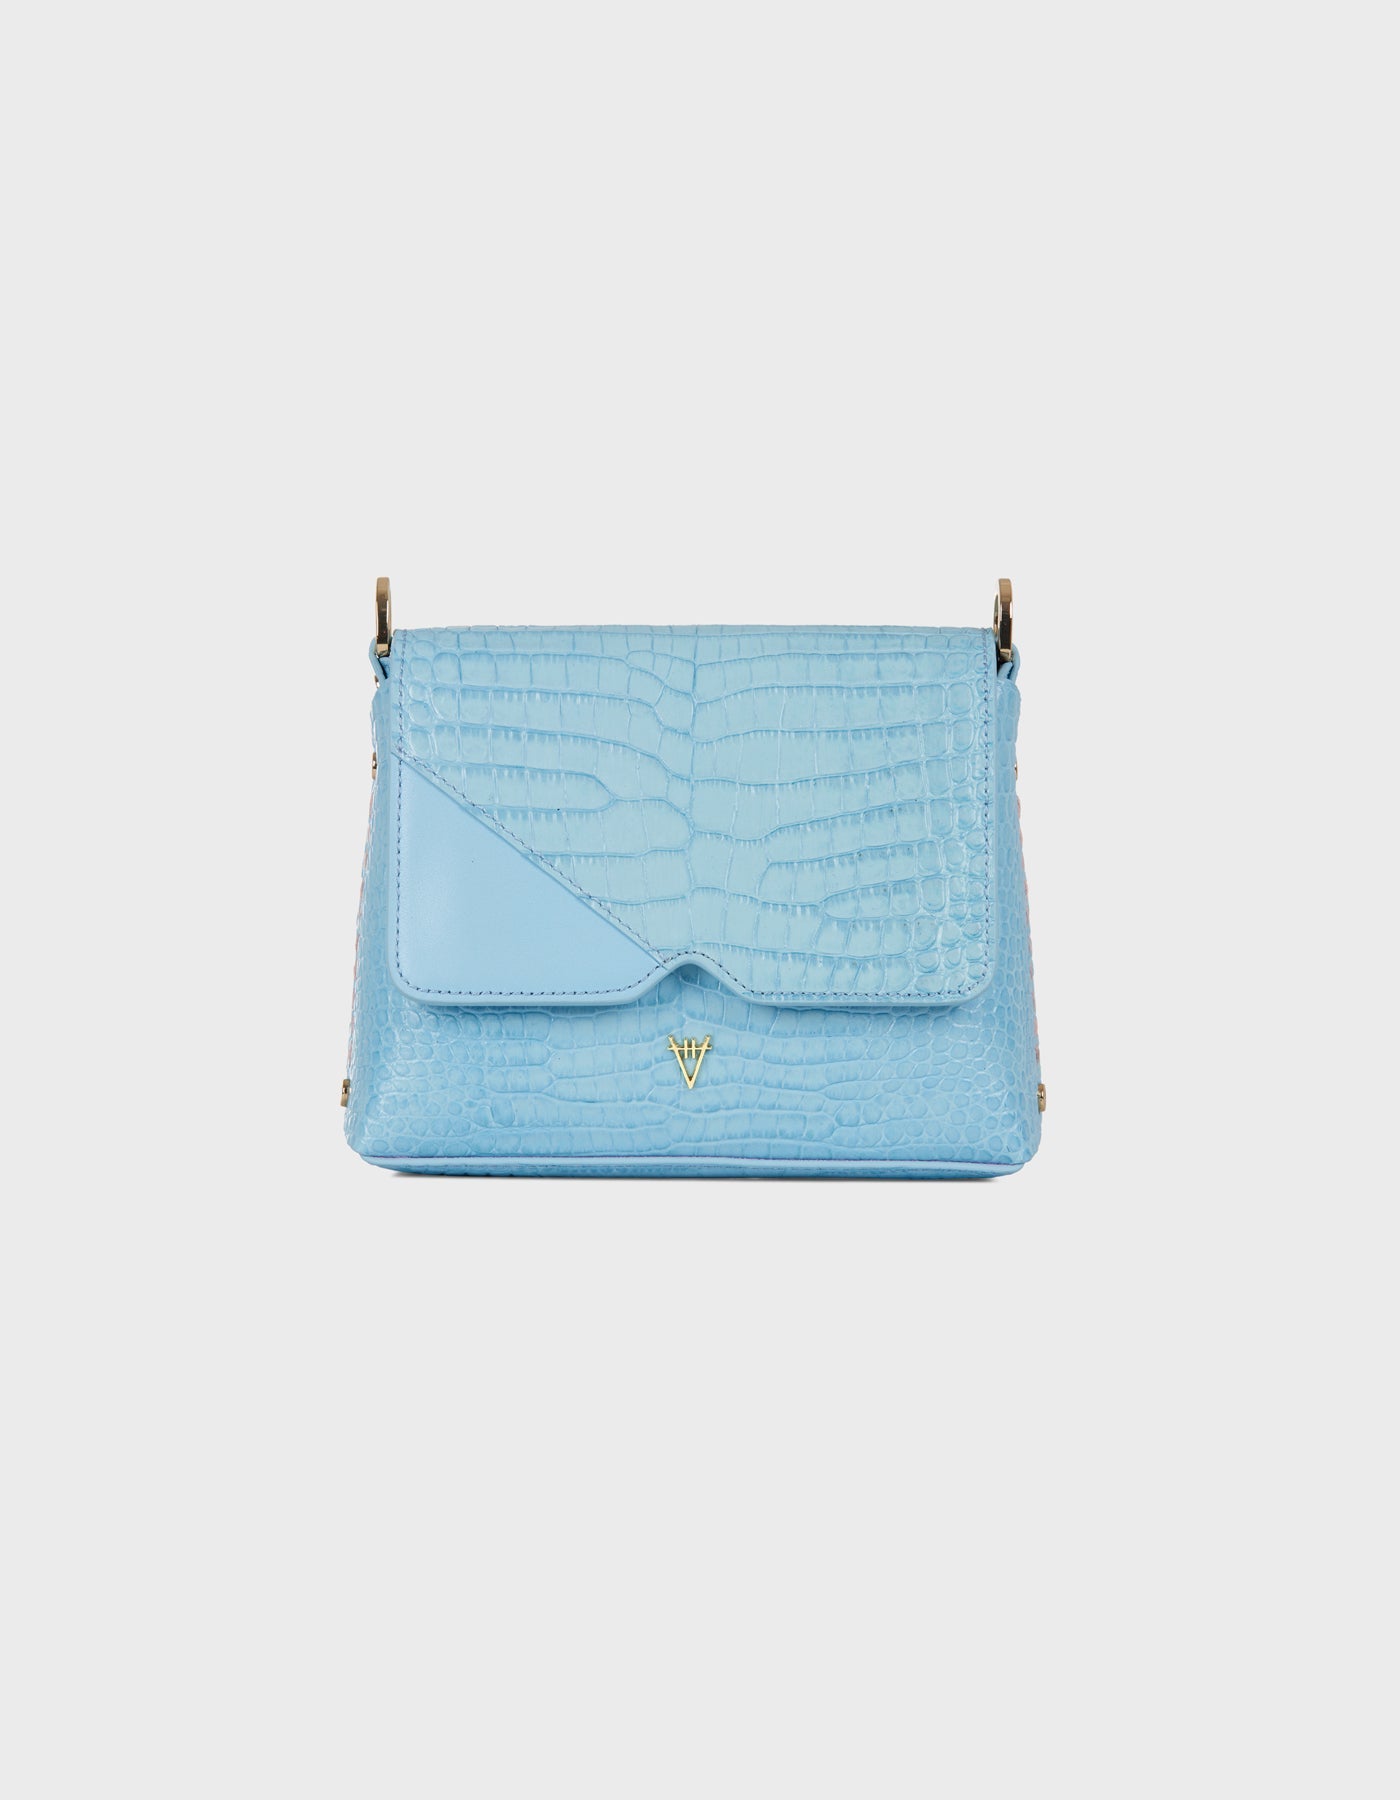 HiVa Atelier | Mini Mare Shoulder Bag Croco Effect Tranquil Blue | Beautiful and Versatile Leather Accessories